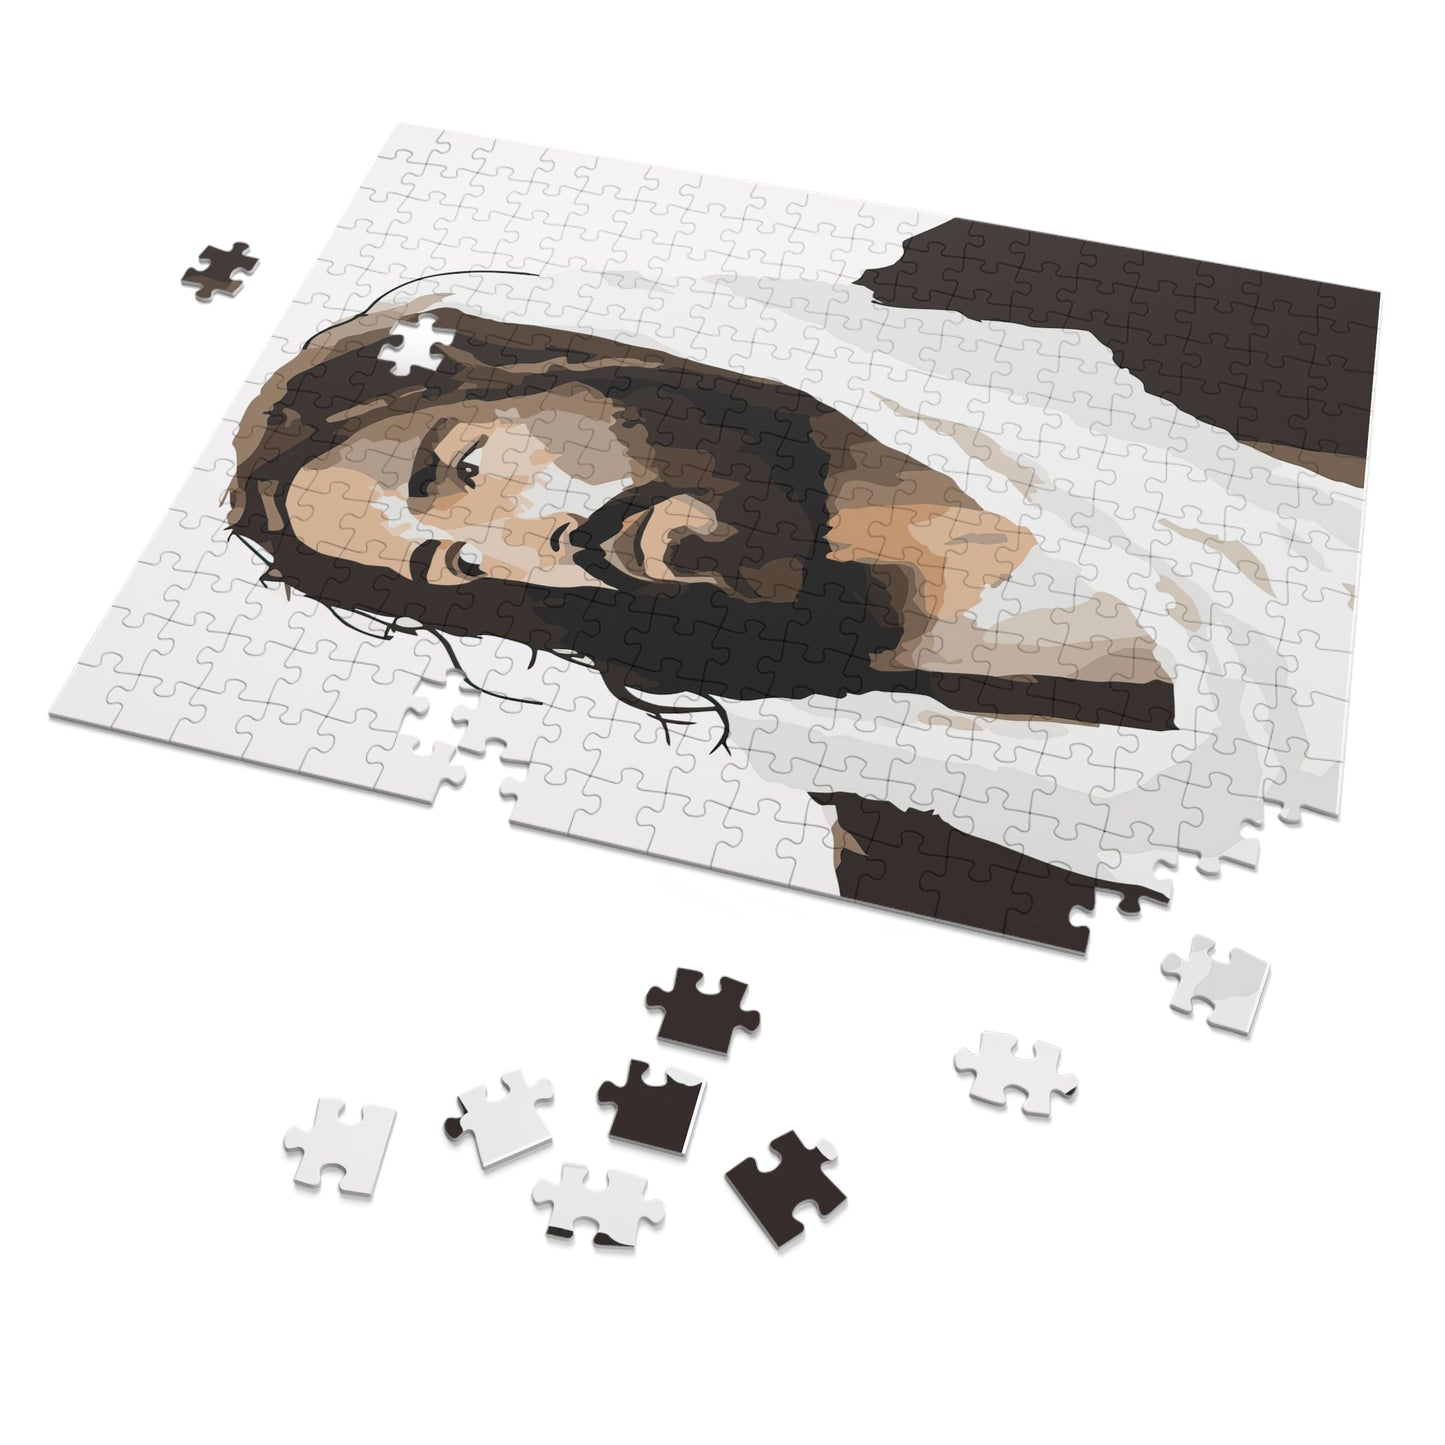 Beloved Son Christian Puzzle